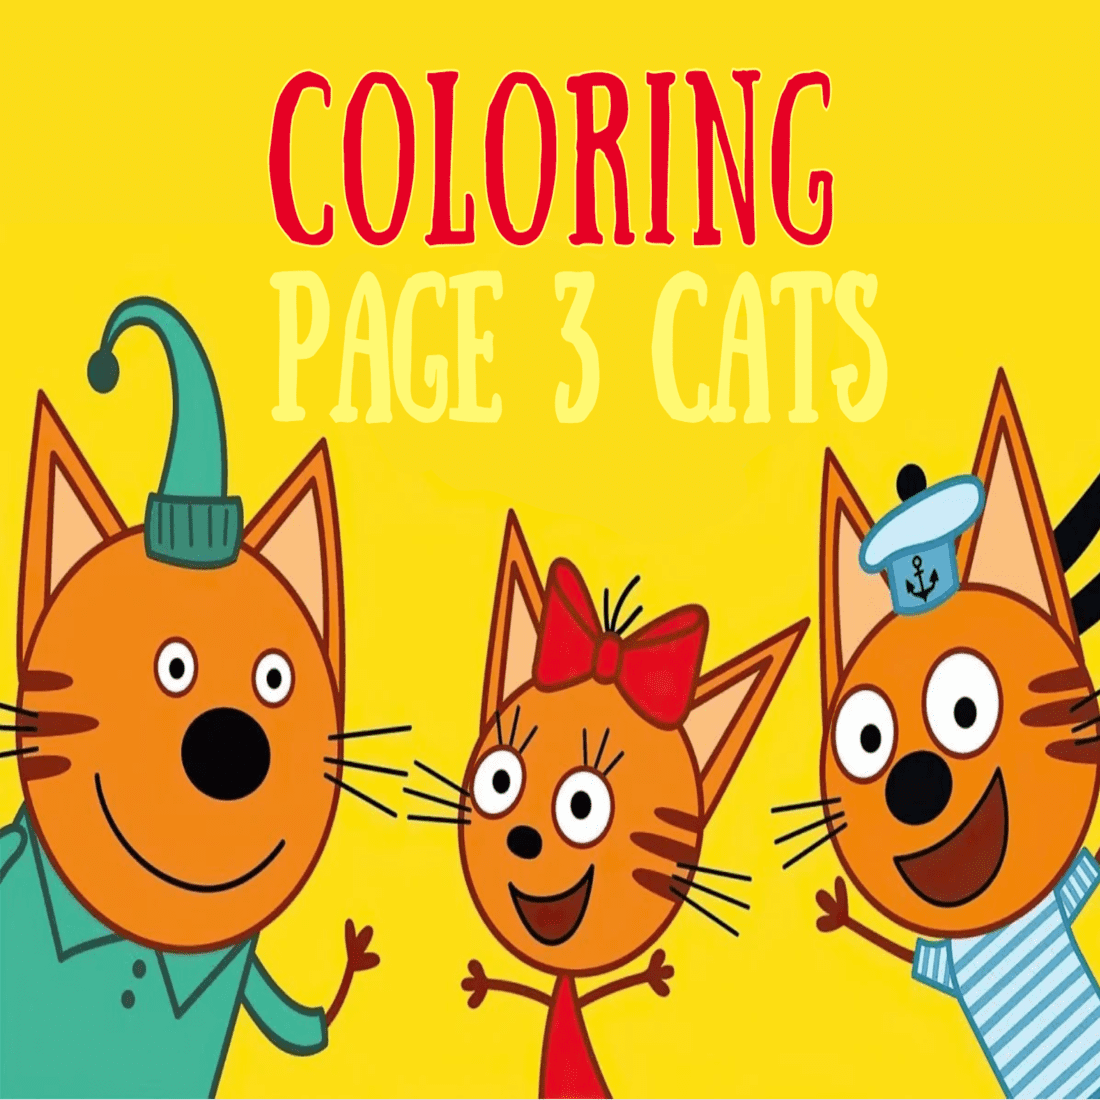 The Three Cats Coloring Book preview image.